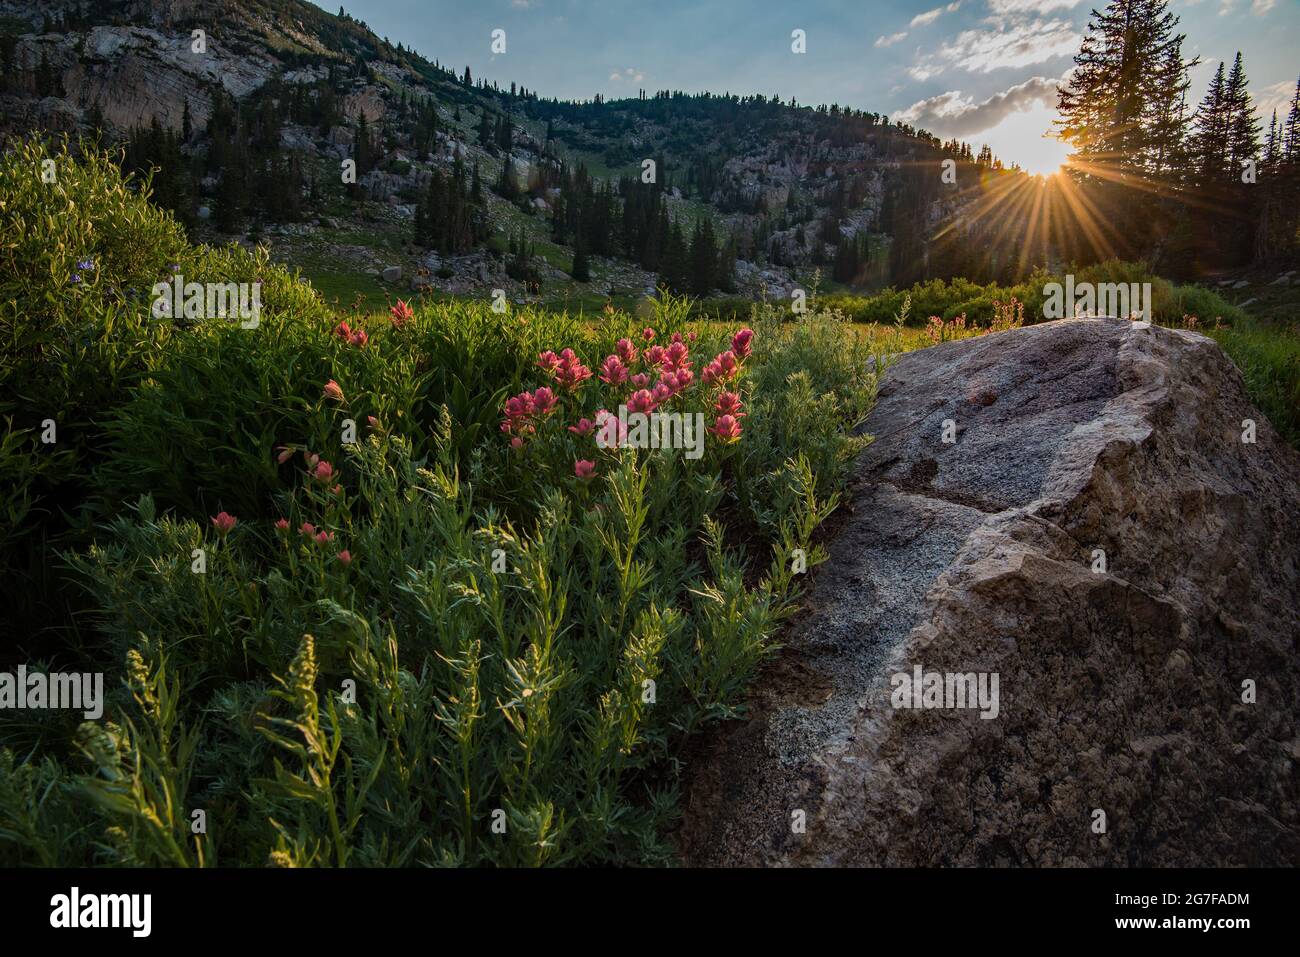 Morning sunrise shining on wildflowers in a mountain meadow. Brightly colored Indian Paintbrush light up with suns morning rays. Stock Photo